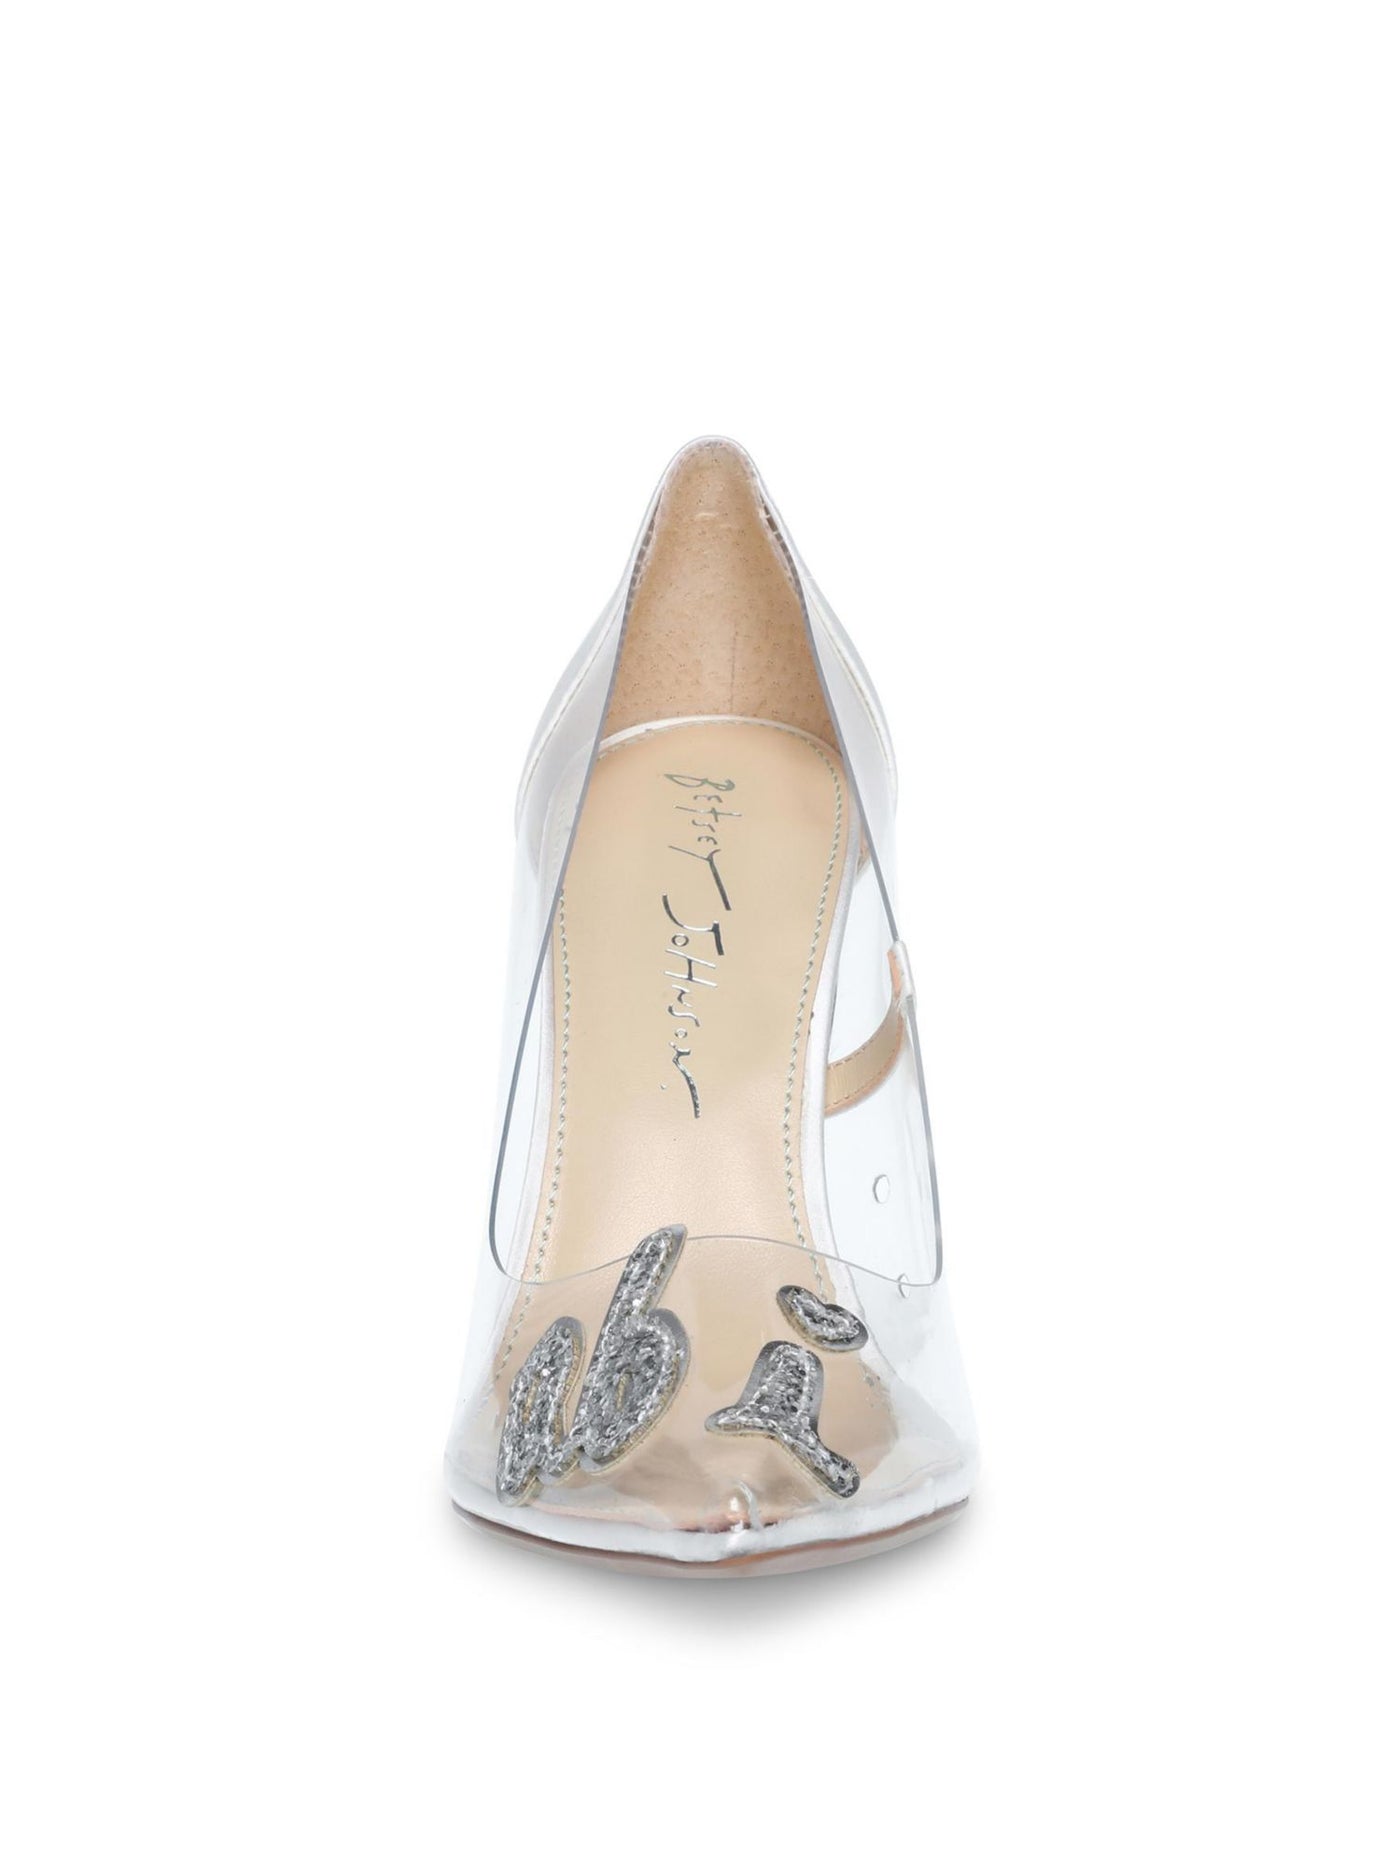 BETSEY JOHNSON Womens Clear Mixed Media Embellished Demi Bridal I Do Pointed Toe Stiletto Slip On Dress Pumps Shoes 6.5 M